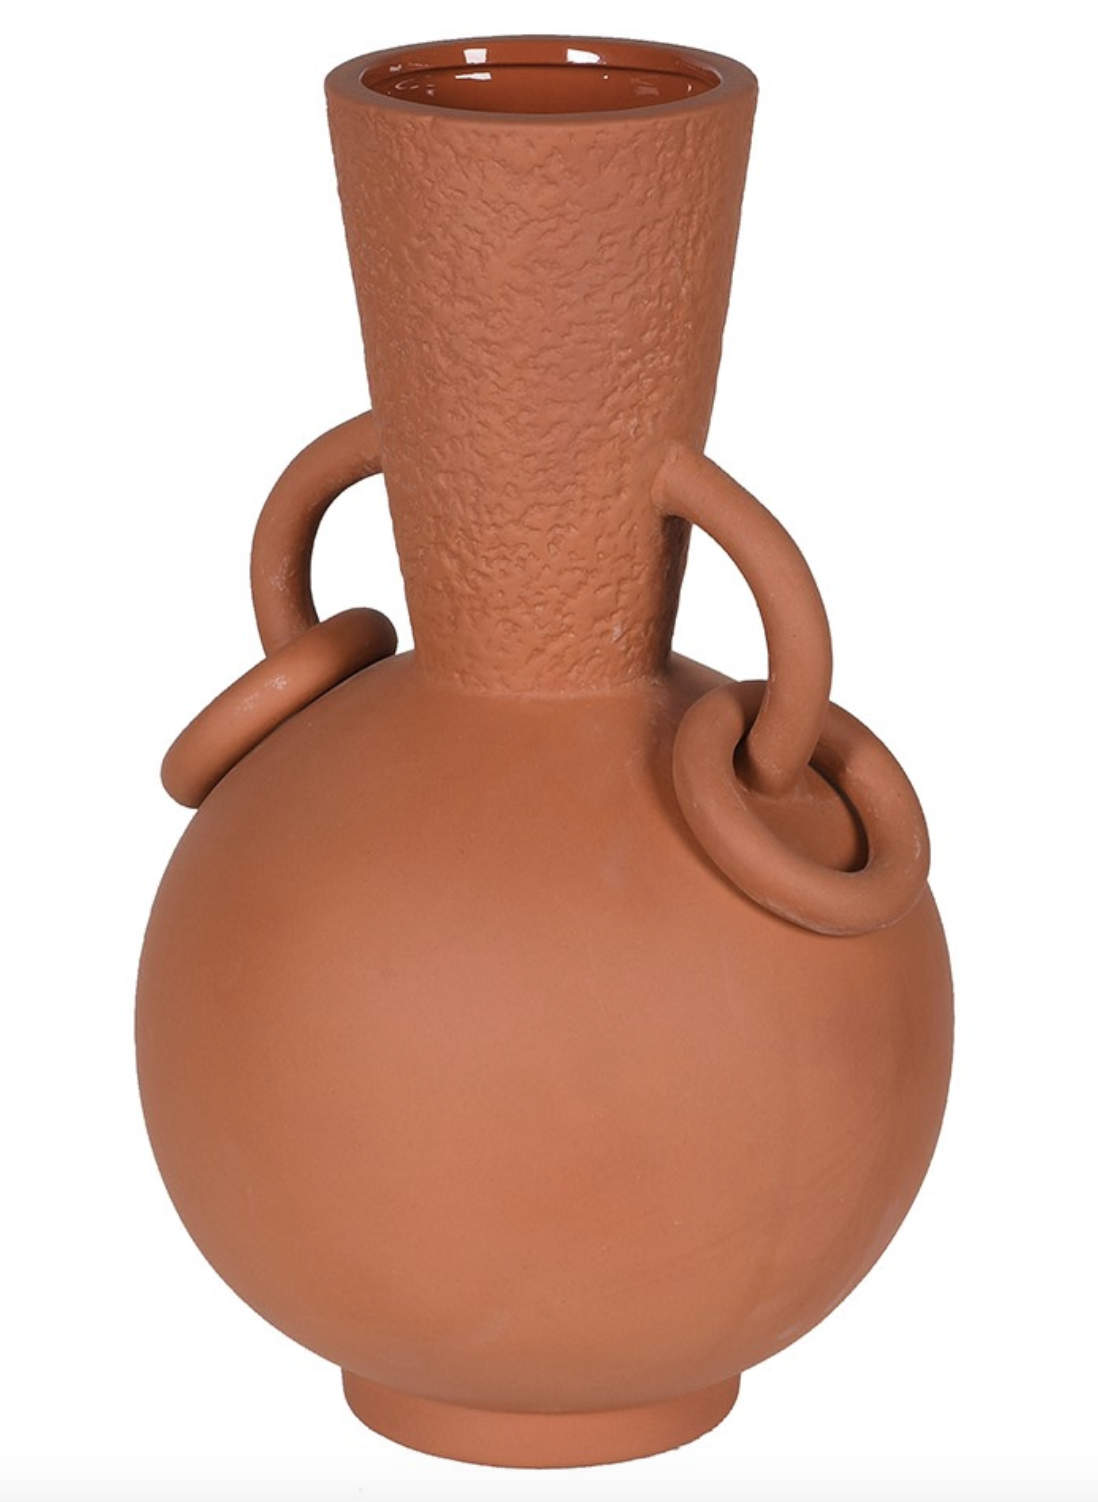 THE BROWNHOUSE INTERIORS Terracotta vase with handle